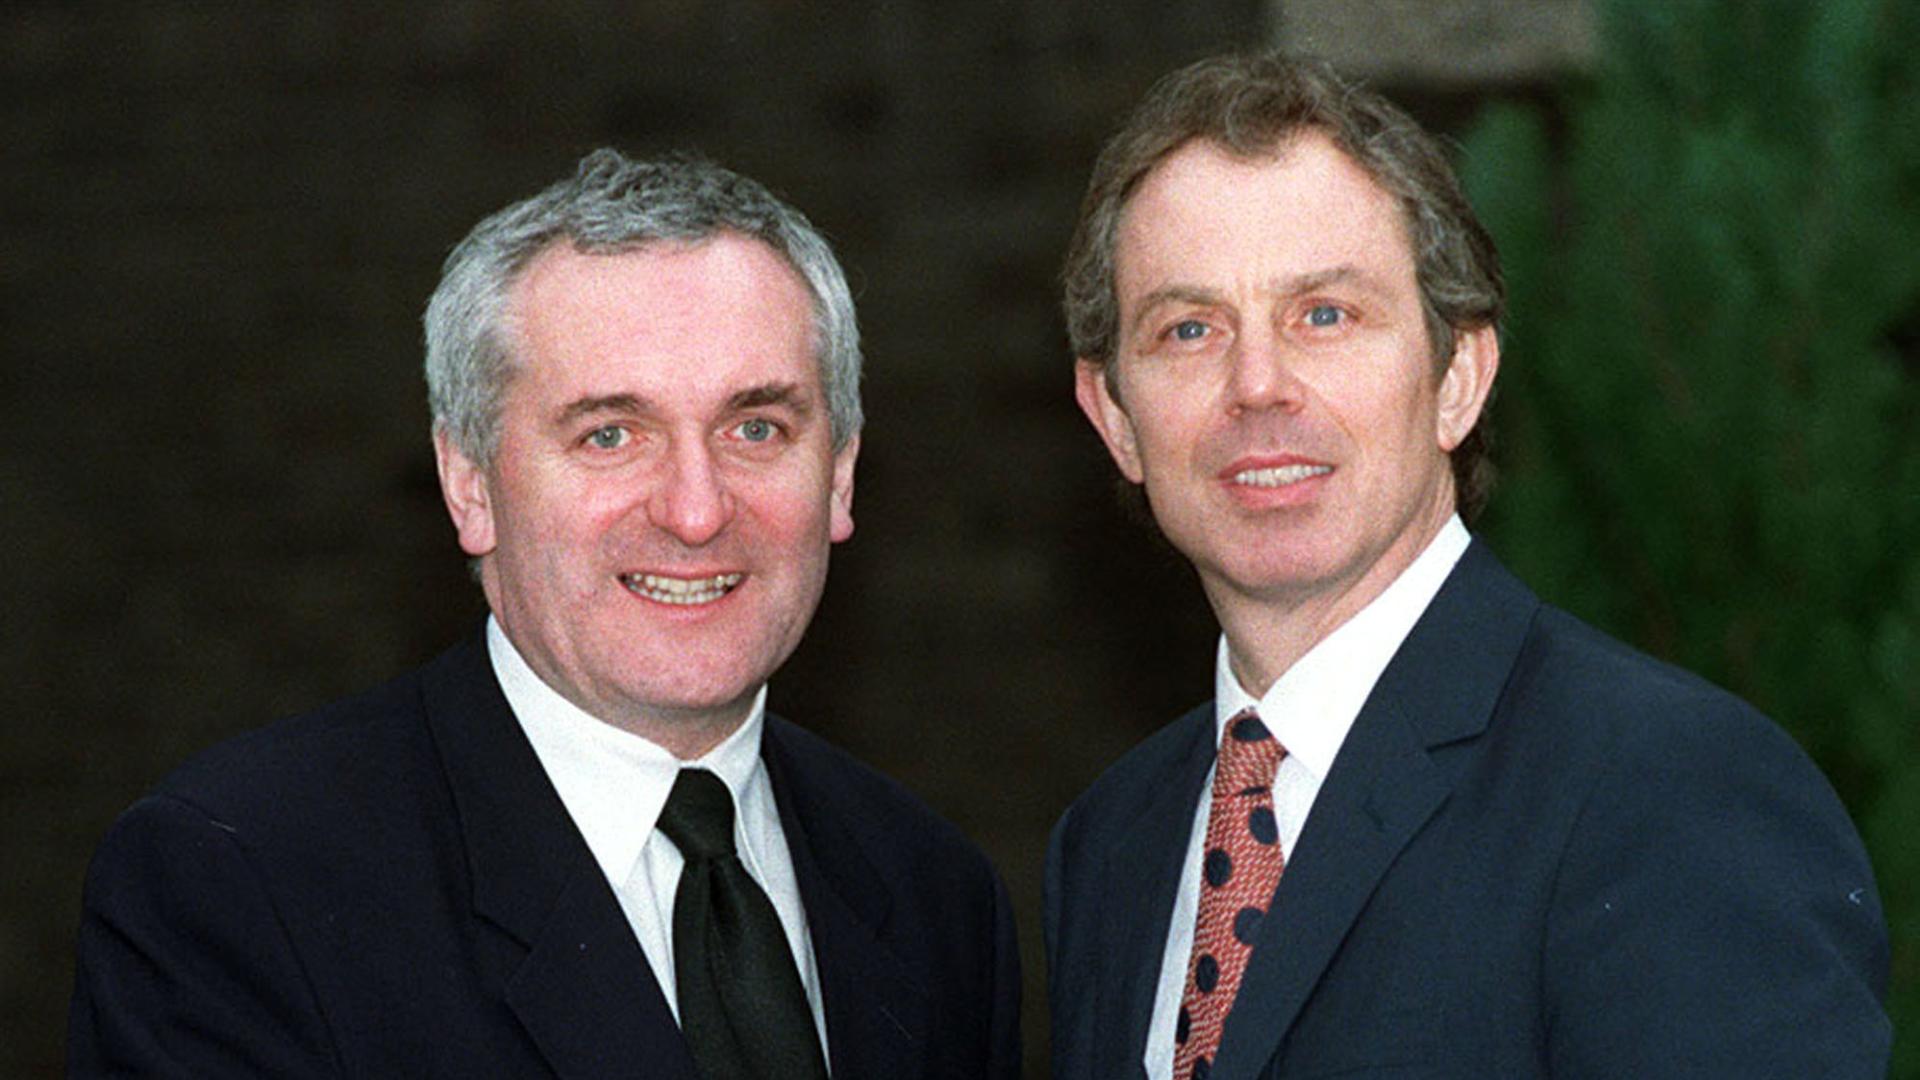 Bertie Ahern and Tony Blair at signing of Good Friday (Belfast) Agreement in 1998